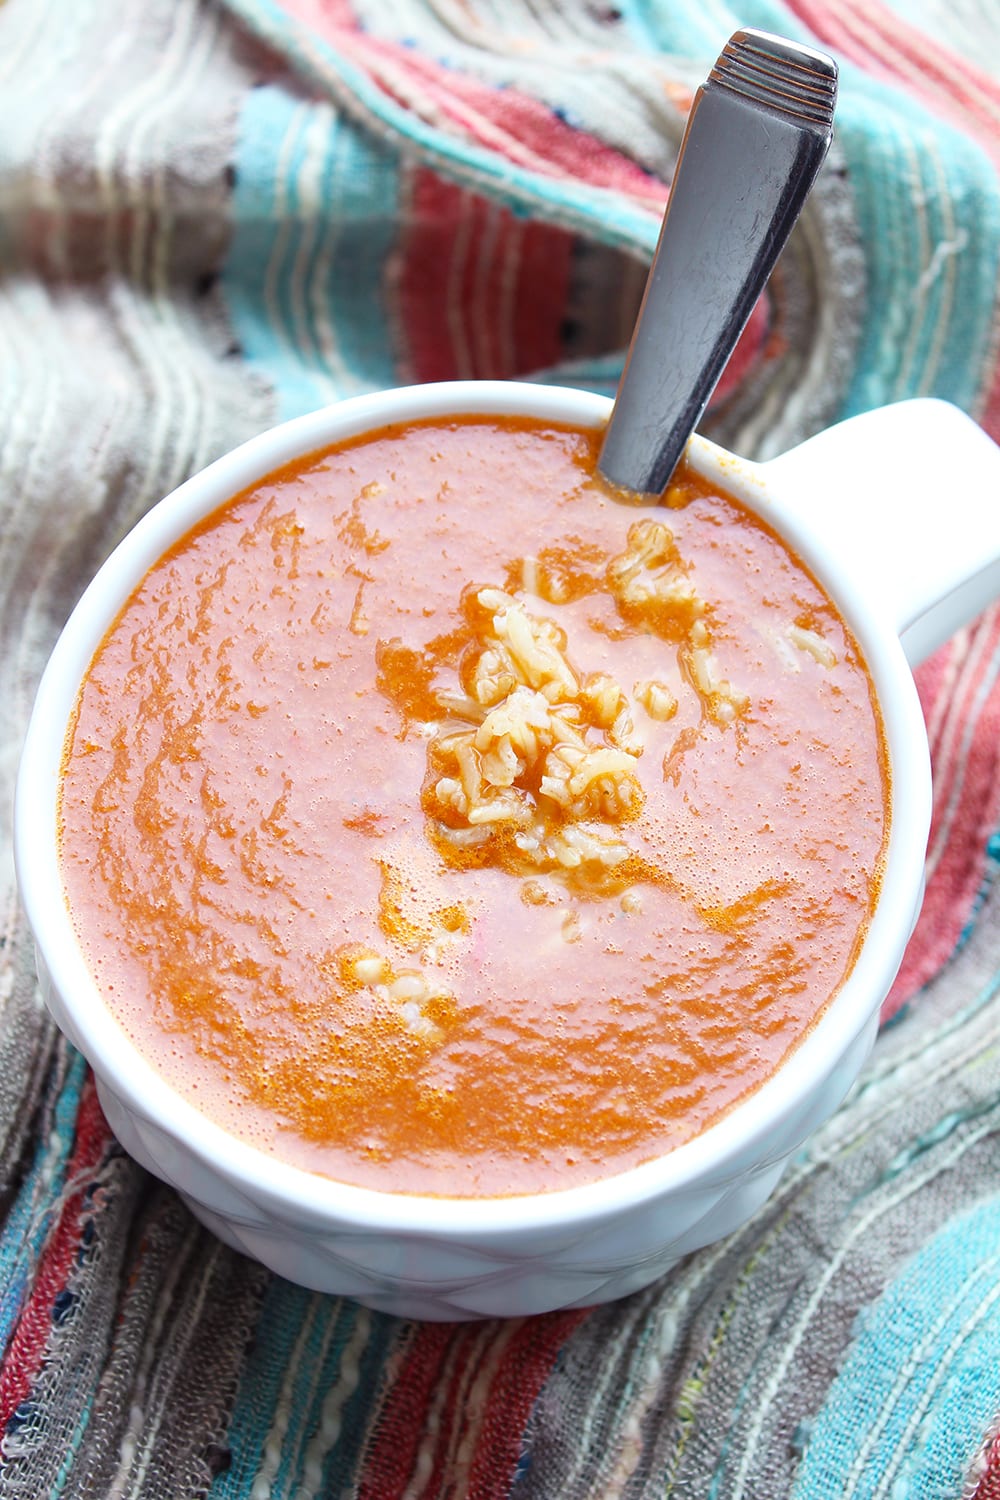 This basic tomato soup recipe is a great base for other soups. Try adding black beans, onions, peppers, corn and cumin to turn it into a Southwest style soup. You can also add plain rice or macaroni to make it a bit heartier!